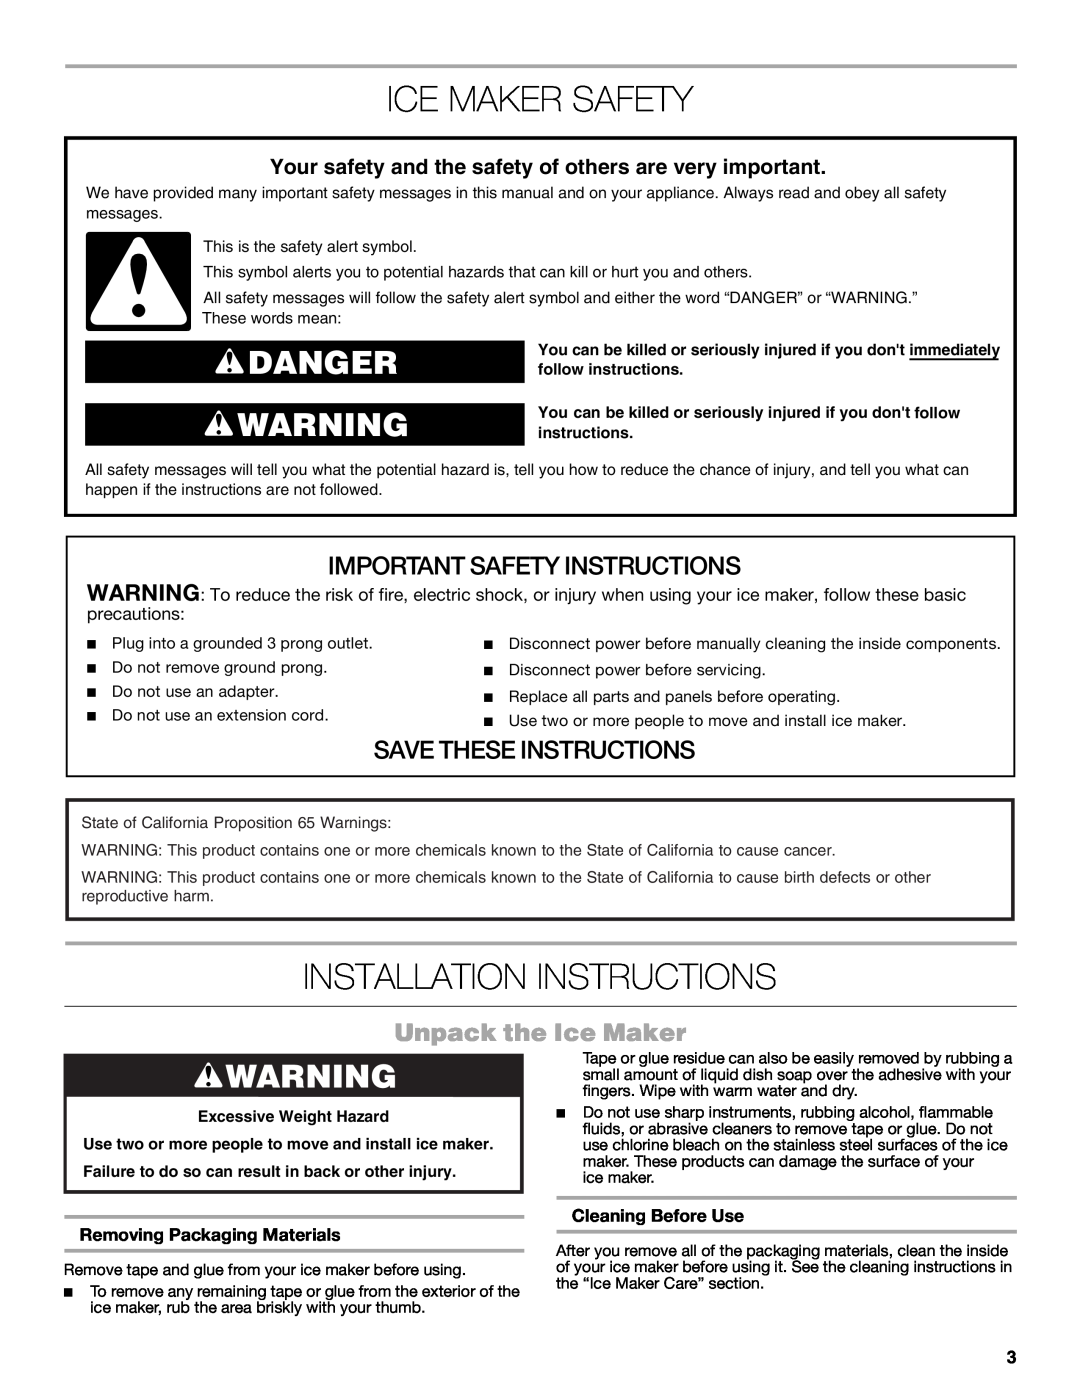 Jenn-Air W10519943B manual Ice Maker Safety, Installation Instructions, Danger, Important Safety Instructions, precautions 